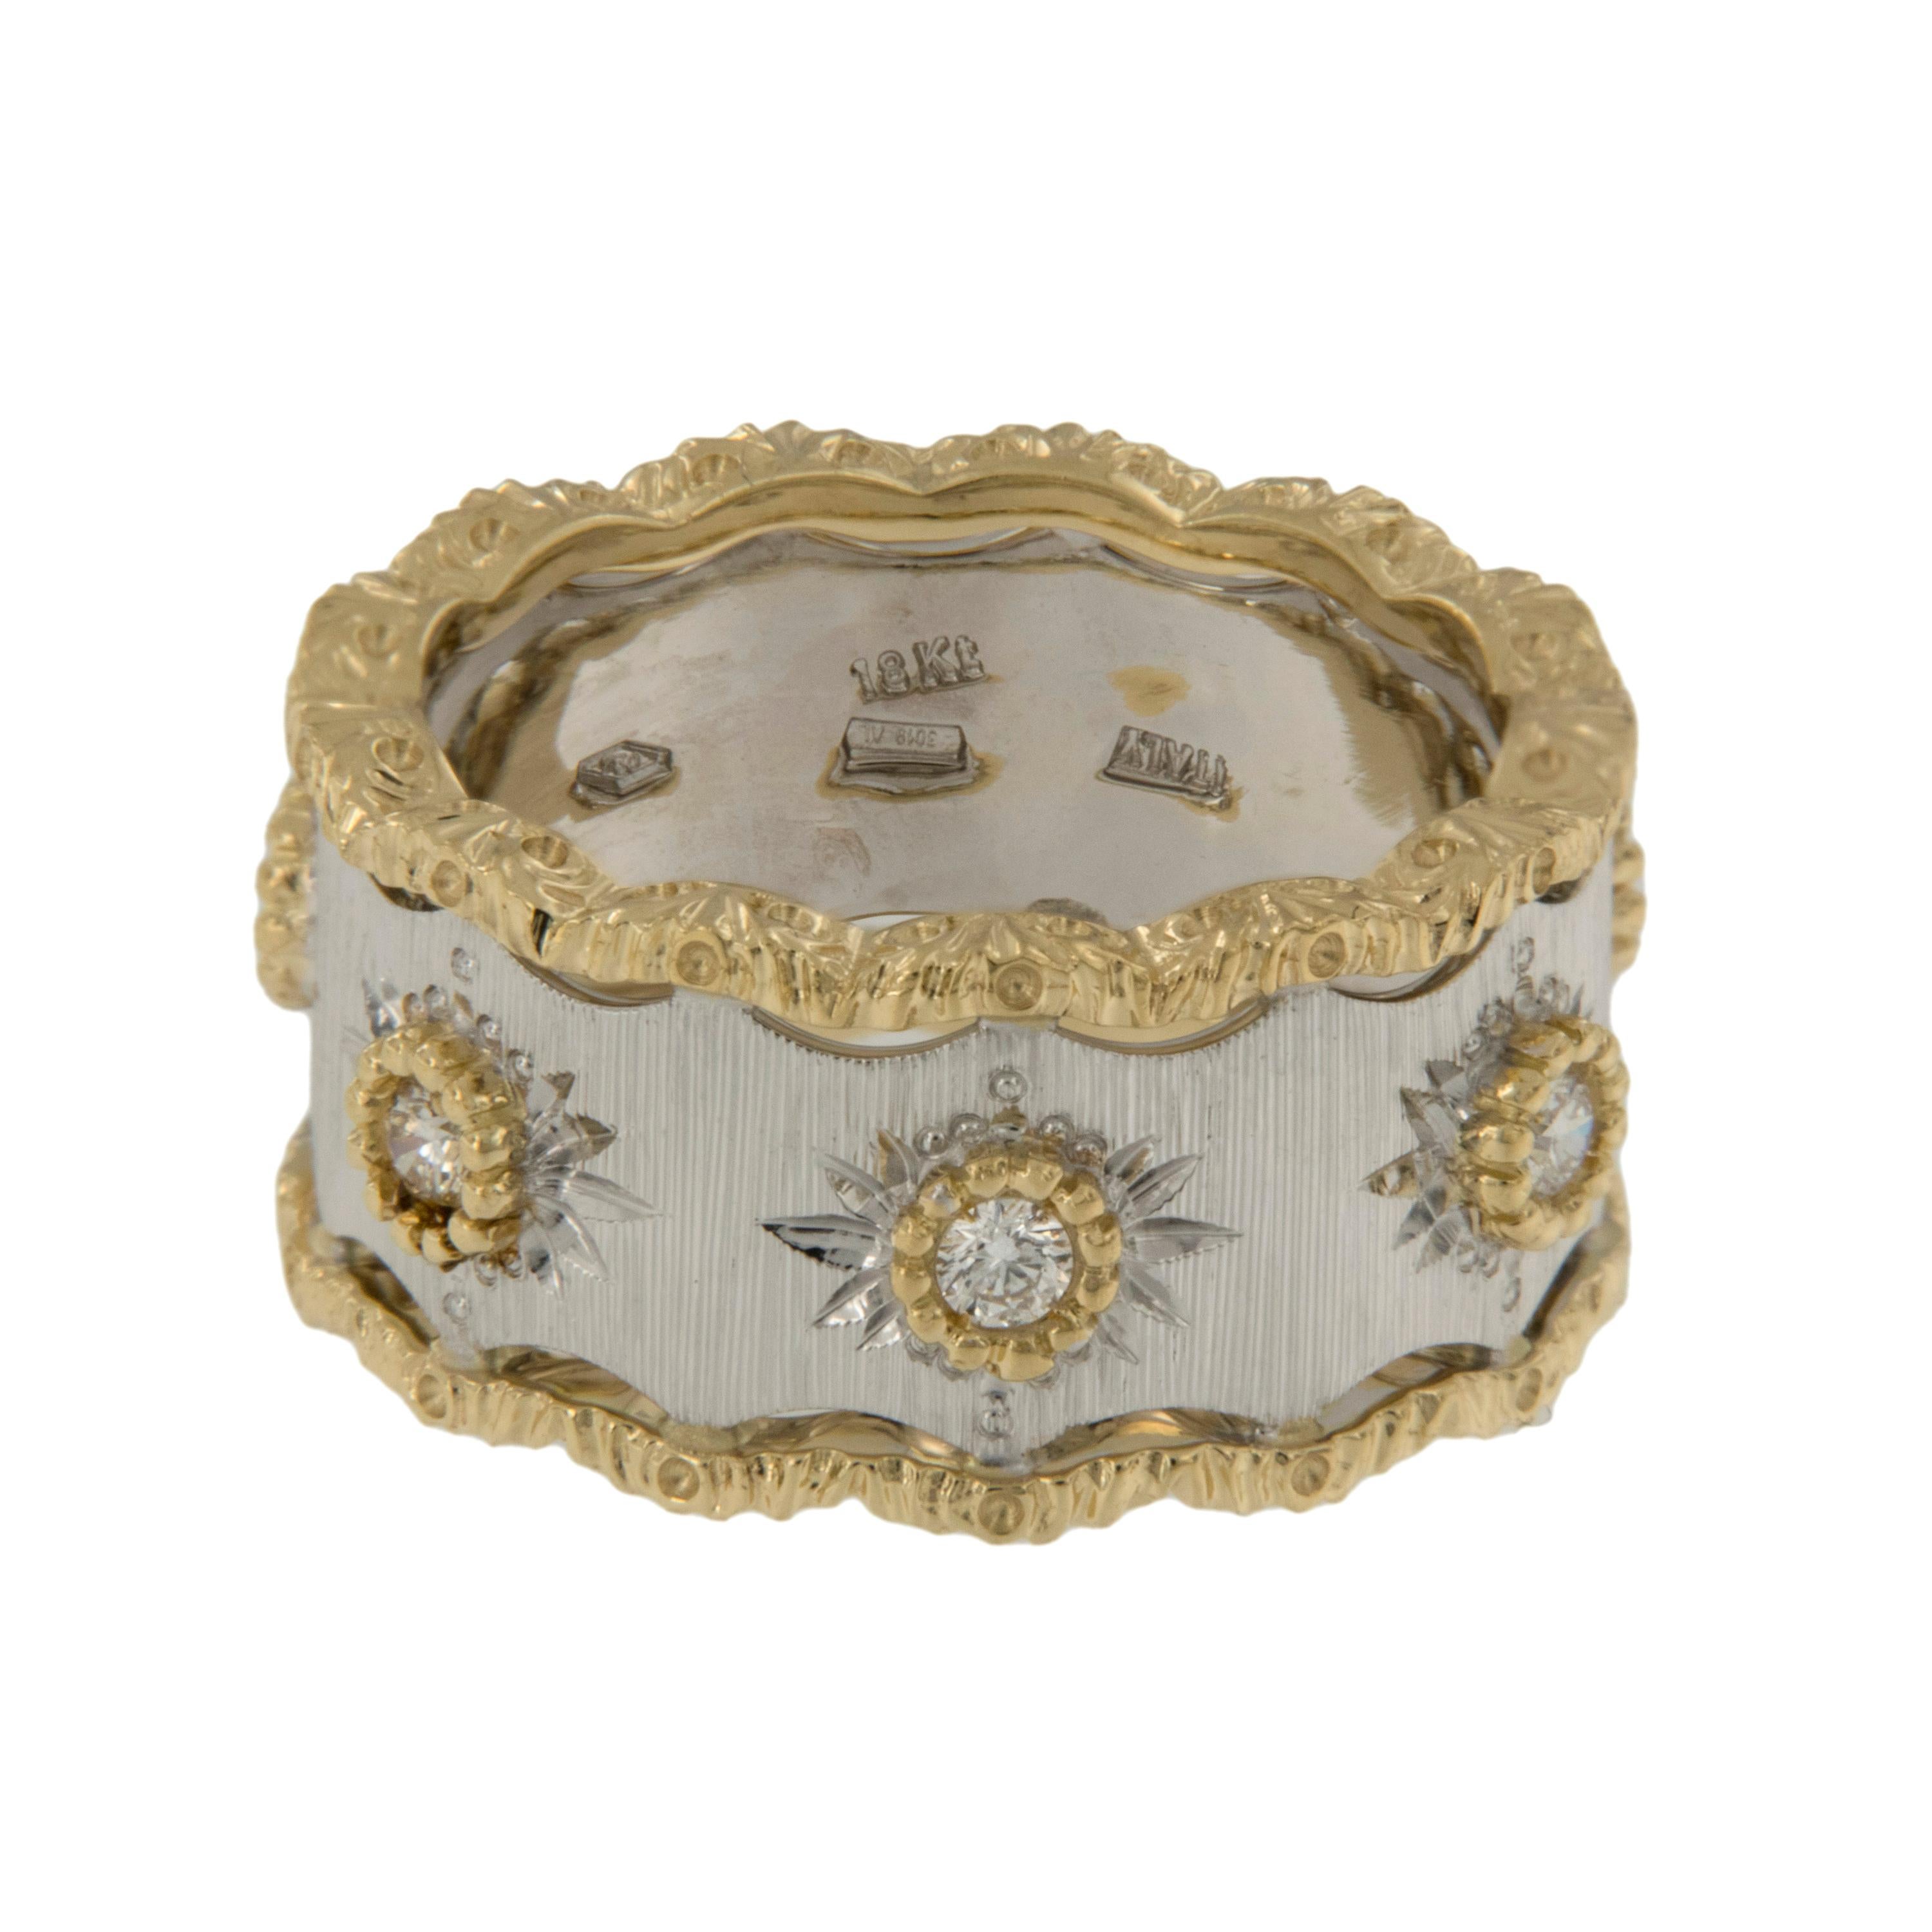 Ring is inspired by the classic Buccellati design featuring textured gold made to look like fine fabric. This exquisite ring has a sheen similar to silk and is outstanding with it's royal 18 karat white and yellow gold combination, perfectly set off